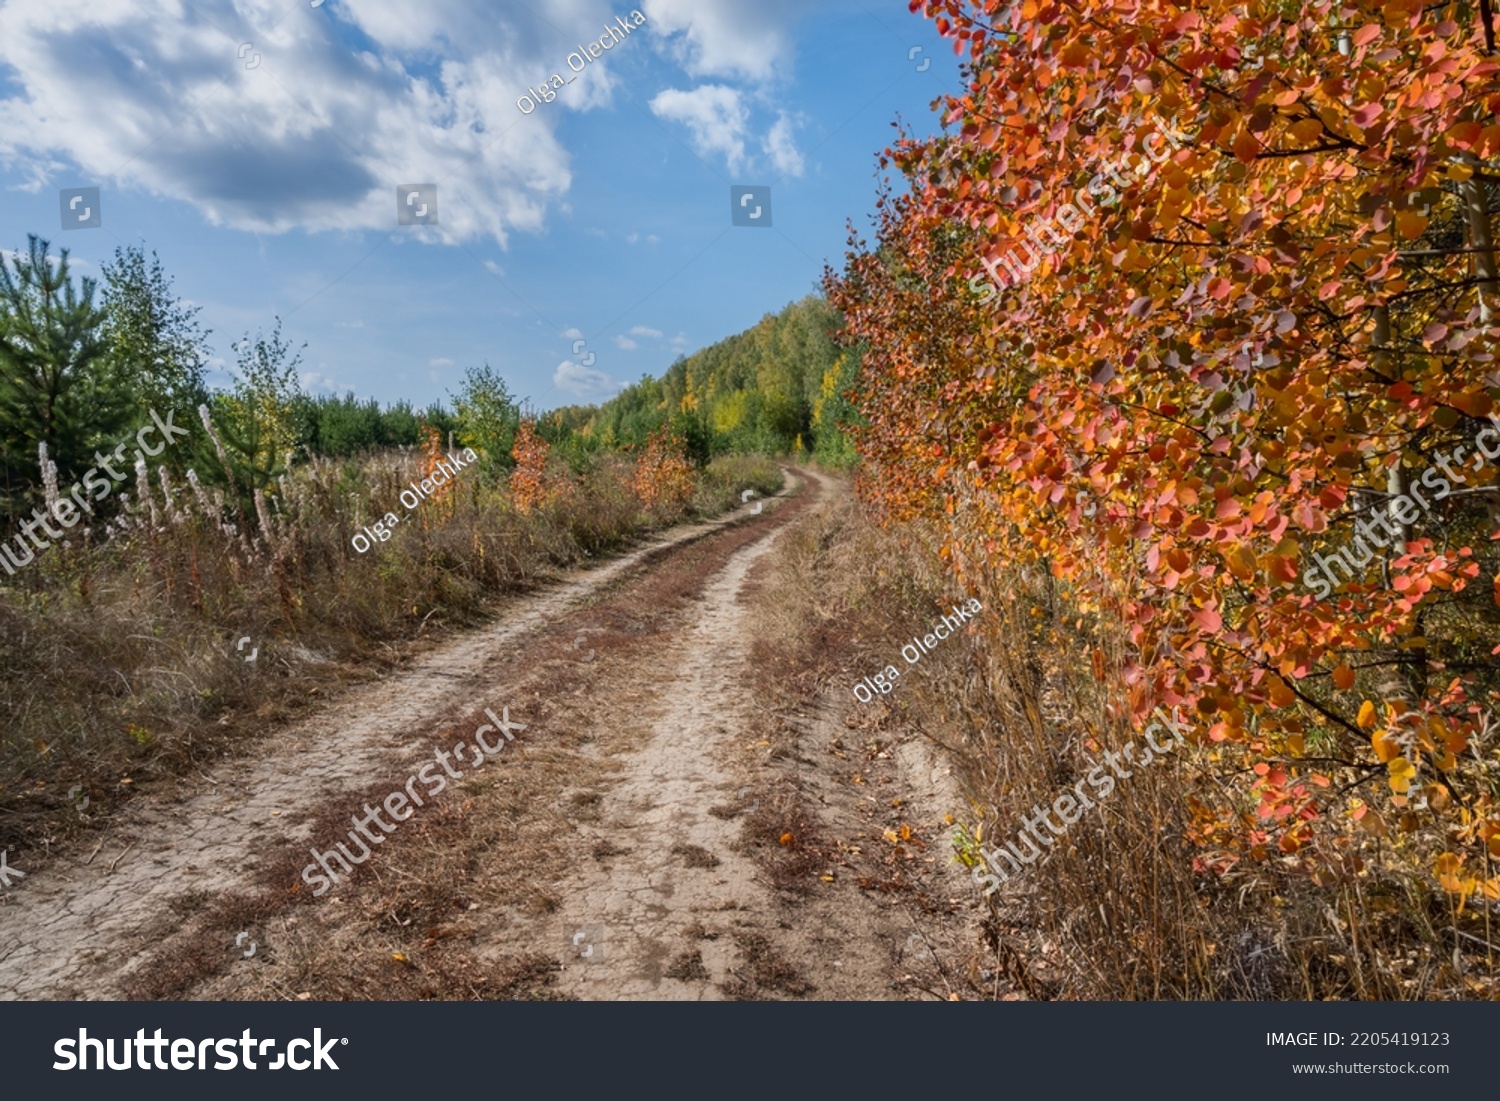 Autumn landscape with a road running into the distance. Orange leaves of an aspen in front. The blue sky with white cumulus clouds sets off the warm colors of the forest. Russia, Ural #2205419123